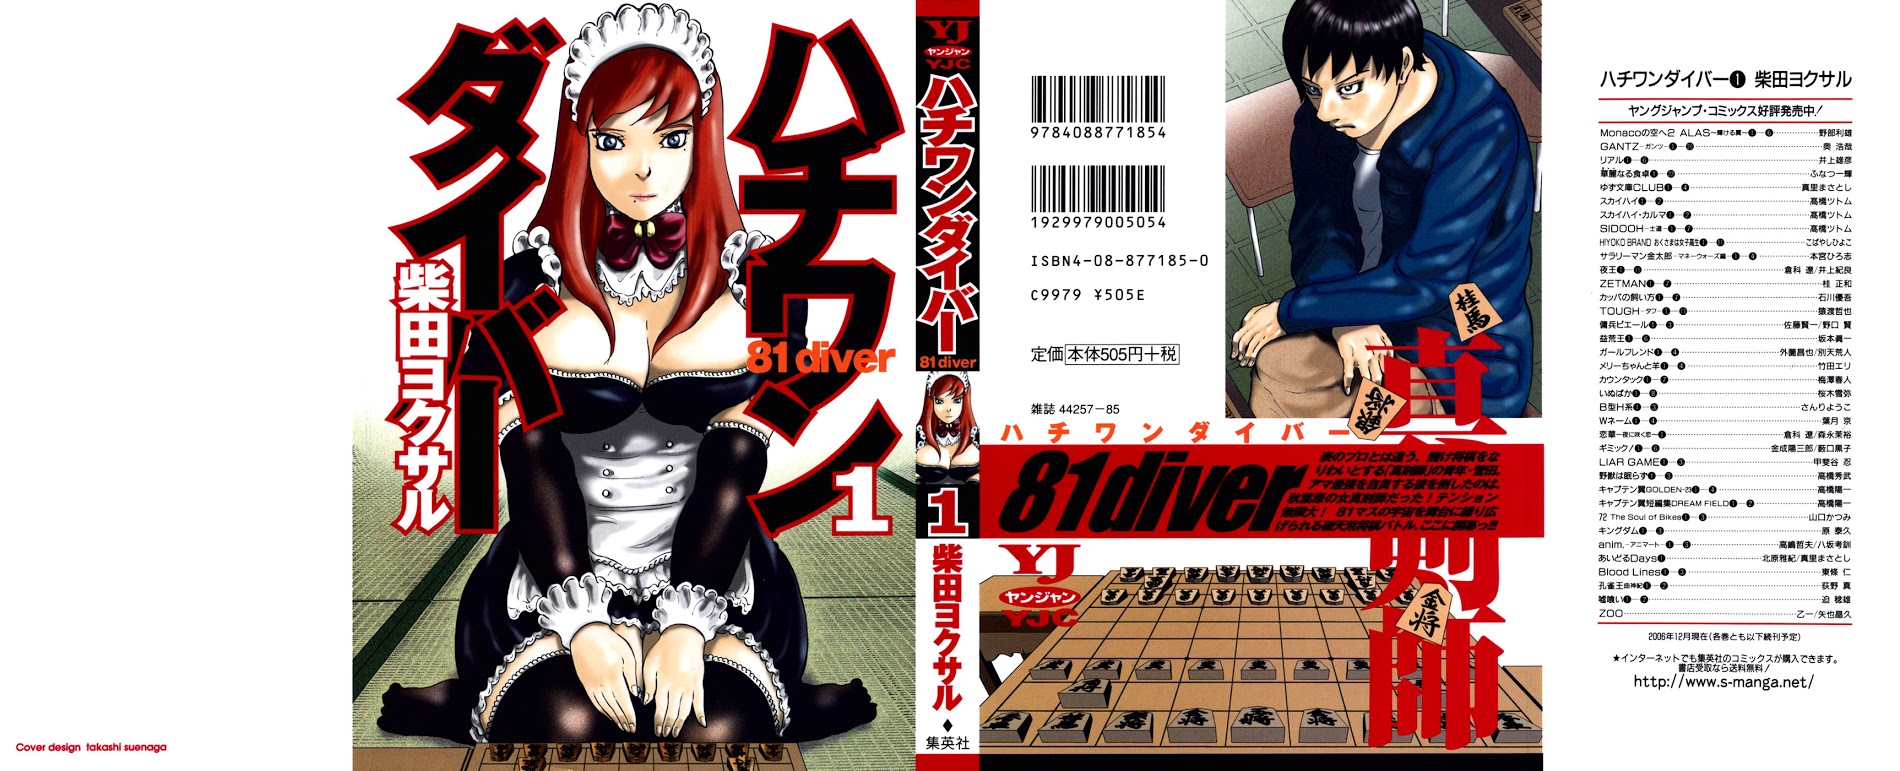 81 Diver Vol.1 Chapter 1 : Ukeshi Of Akiba - Picture 2